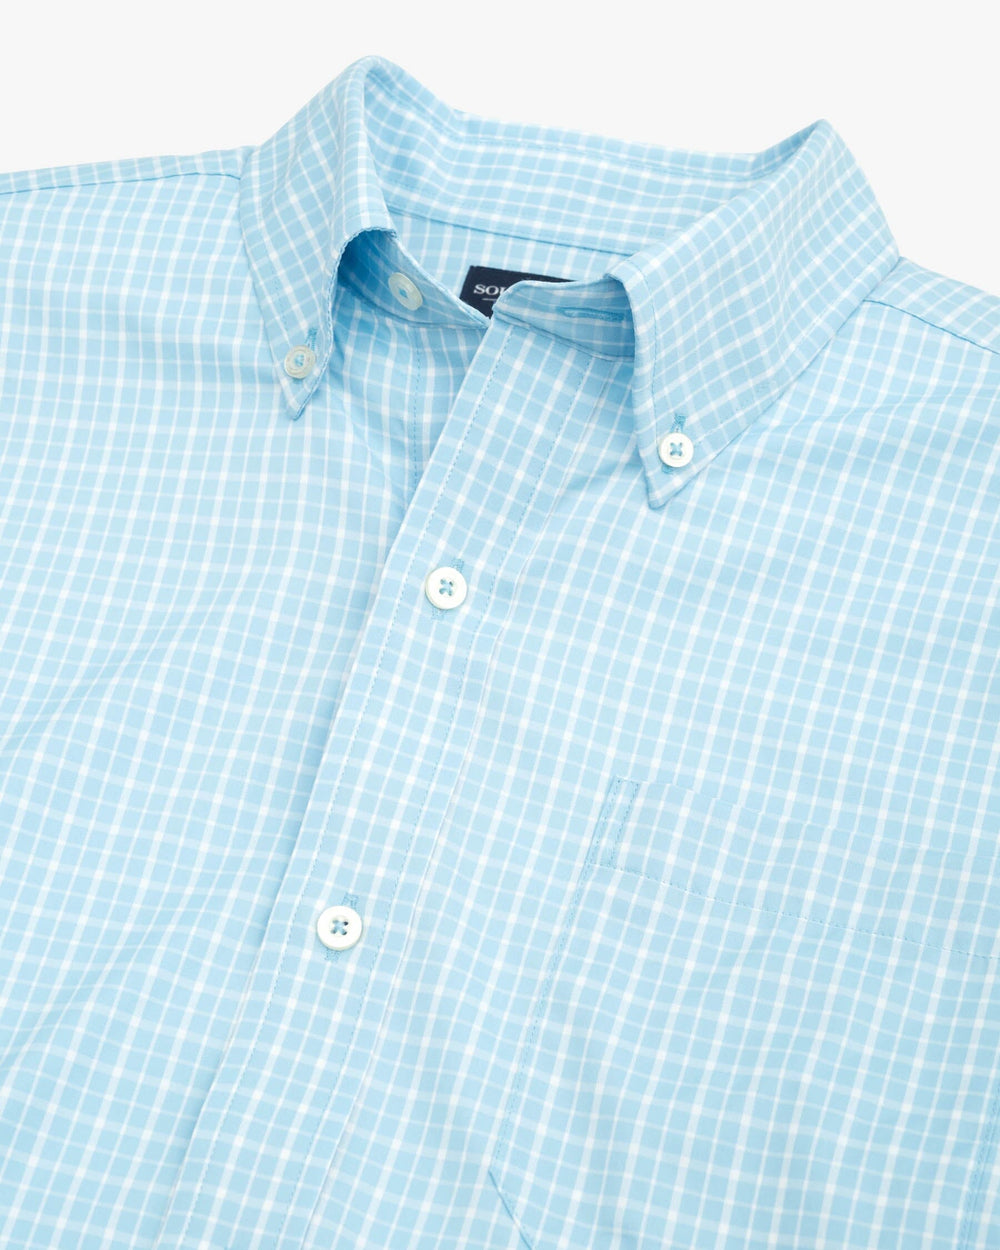 The detail view of the Southern Tide brrr Charleston Beaumont Plaid Intercoastal Sport Shirt by Southern Tide - Rain Water